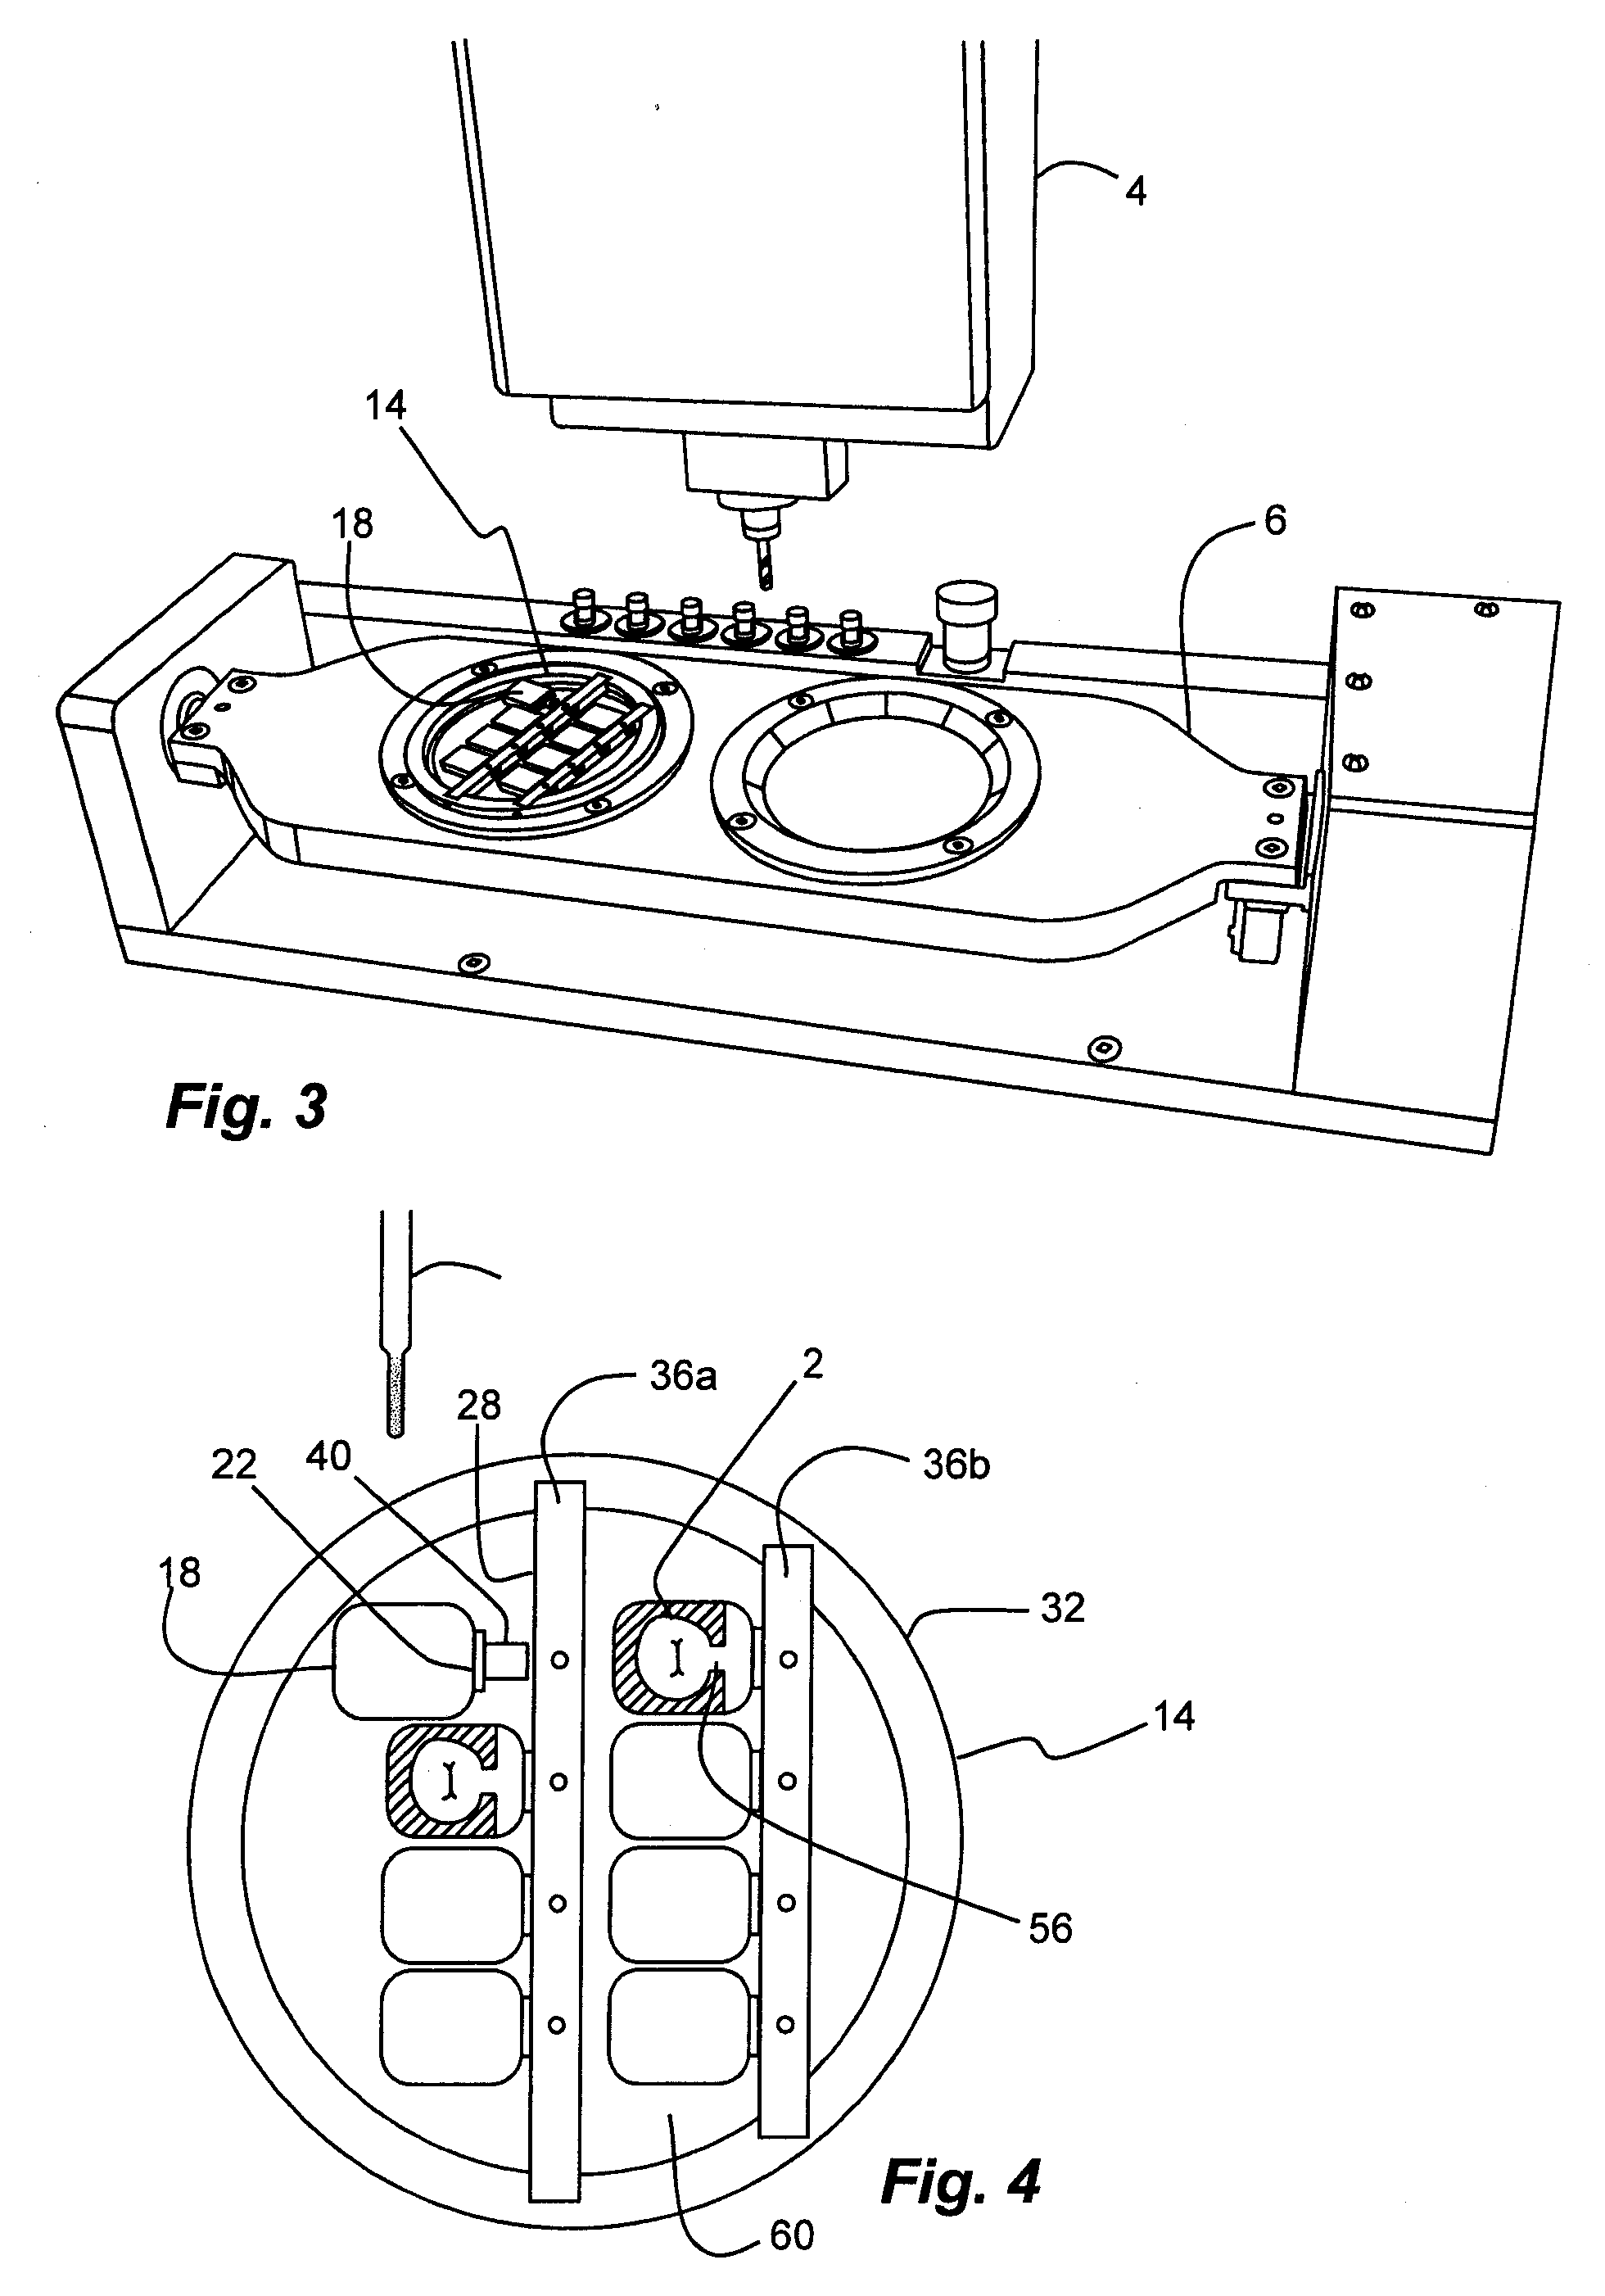 Device and Method of Securing Dental Material for Production of Dental Prosthesis